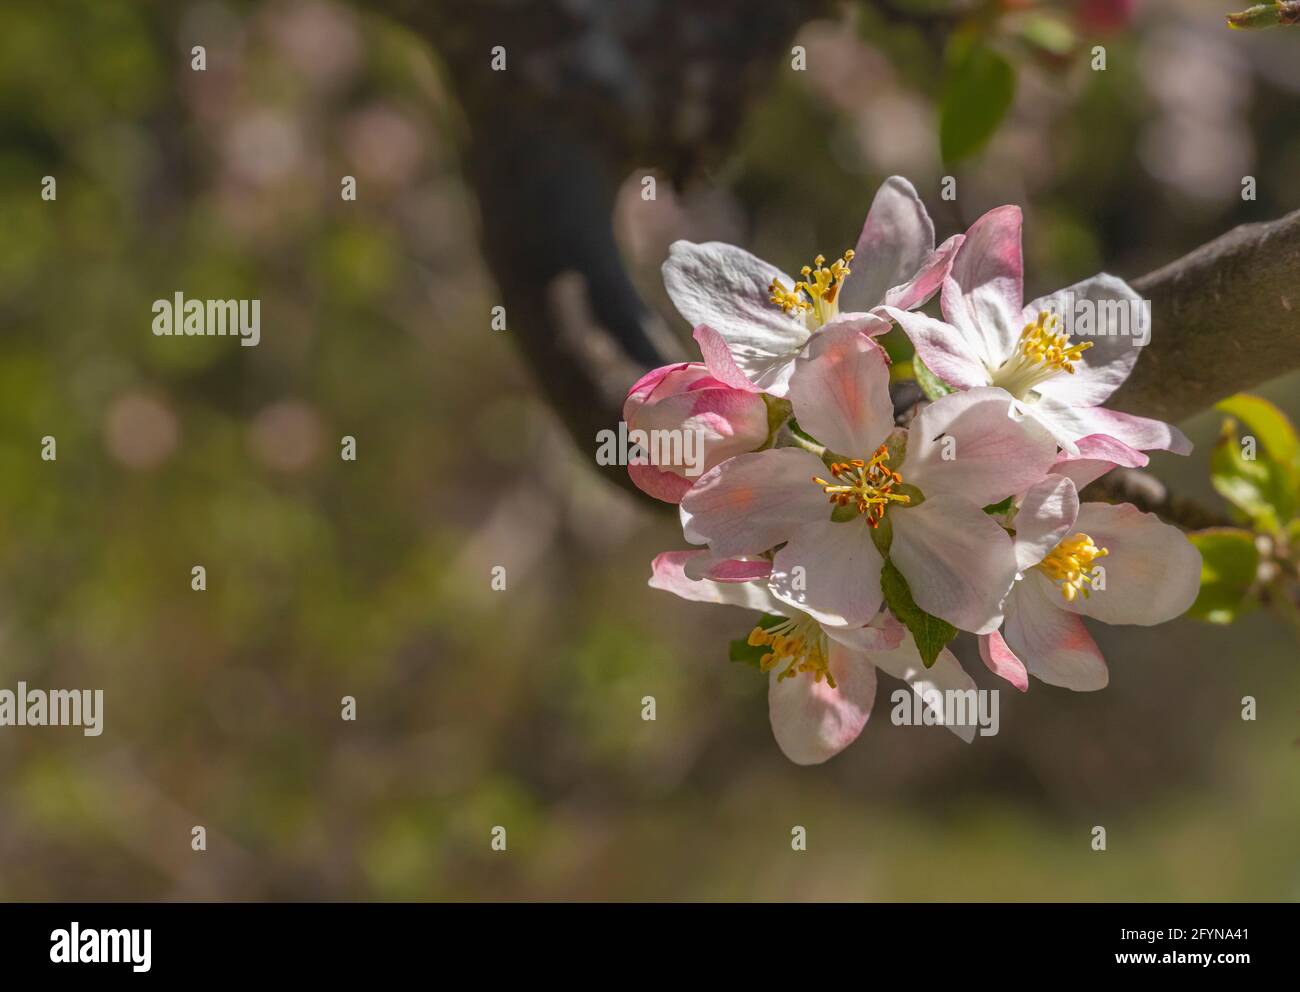 Detail of the flowering wild apple tree, Malus sylvestris, with white flowers with a pink tint. Abruzzo, Italy, Europe Stock Photo